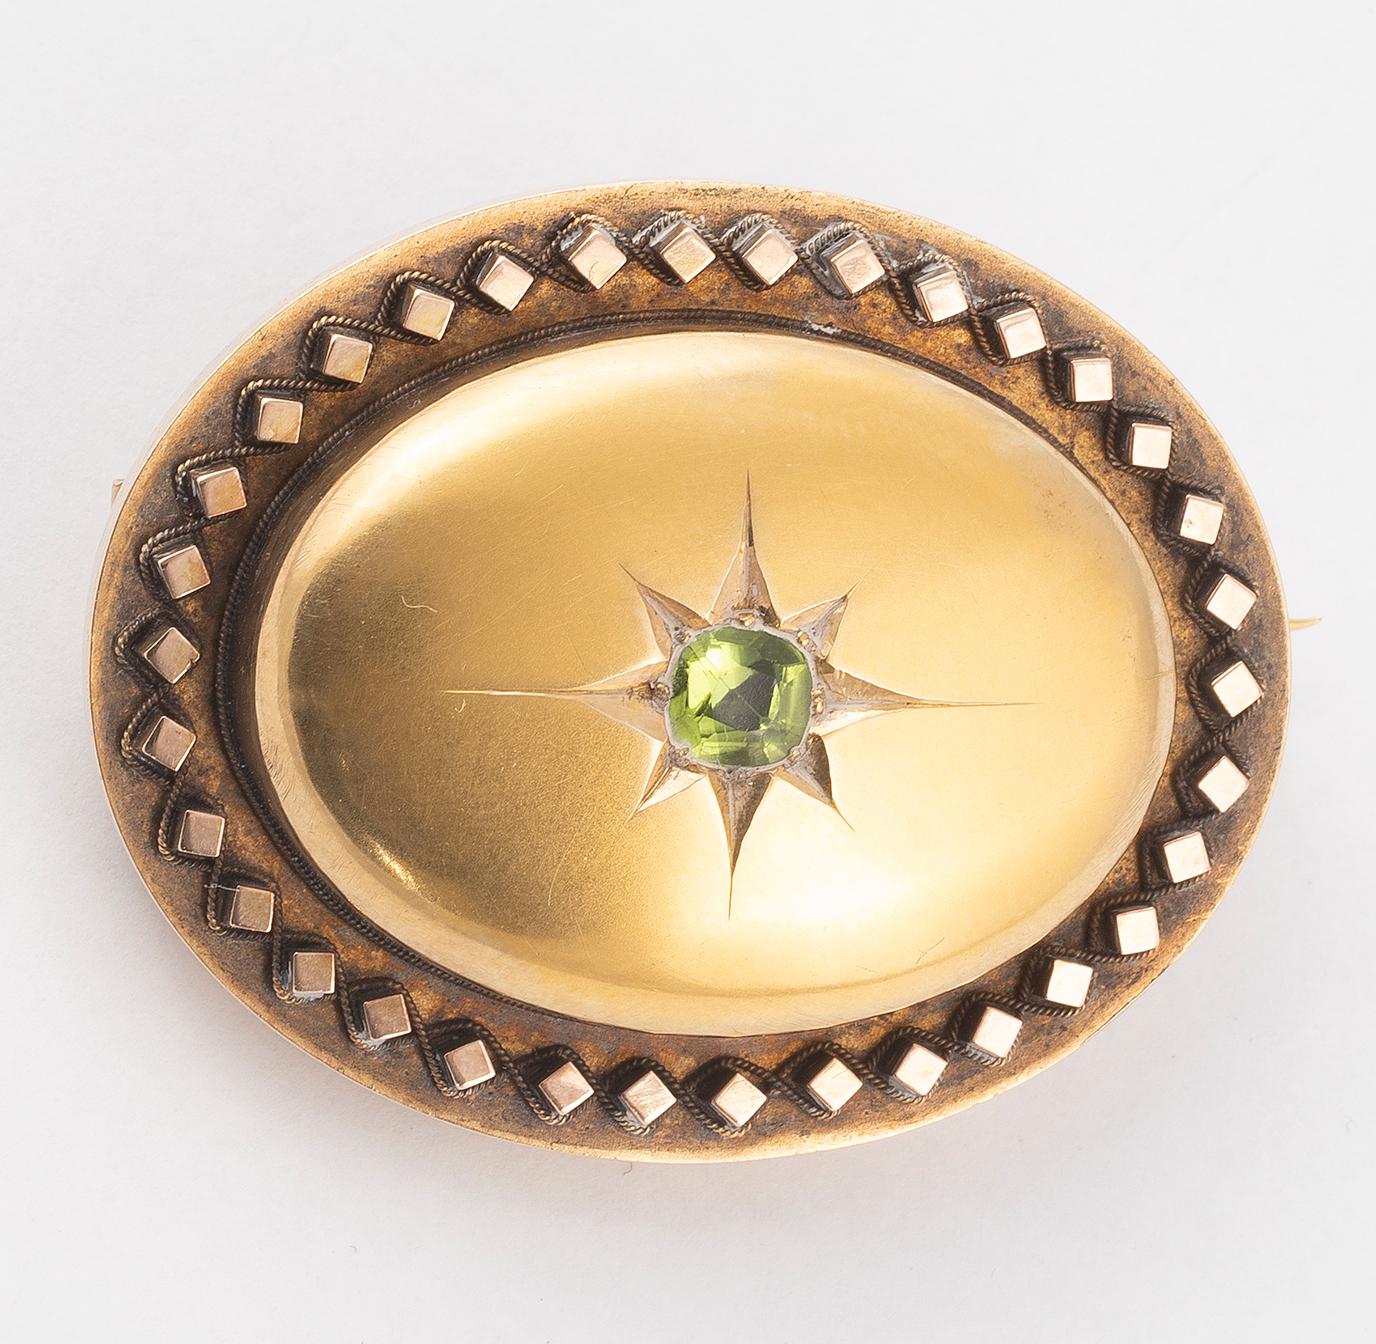 Cushion Cut Victorian Gold and Peridot Brooch/Pendant For Sale